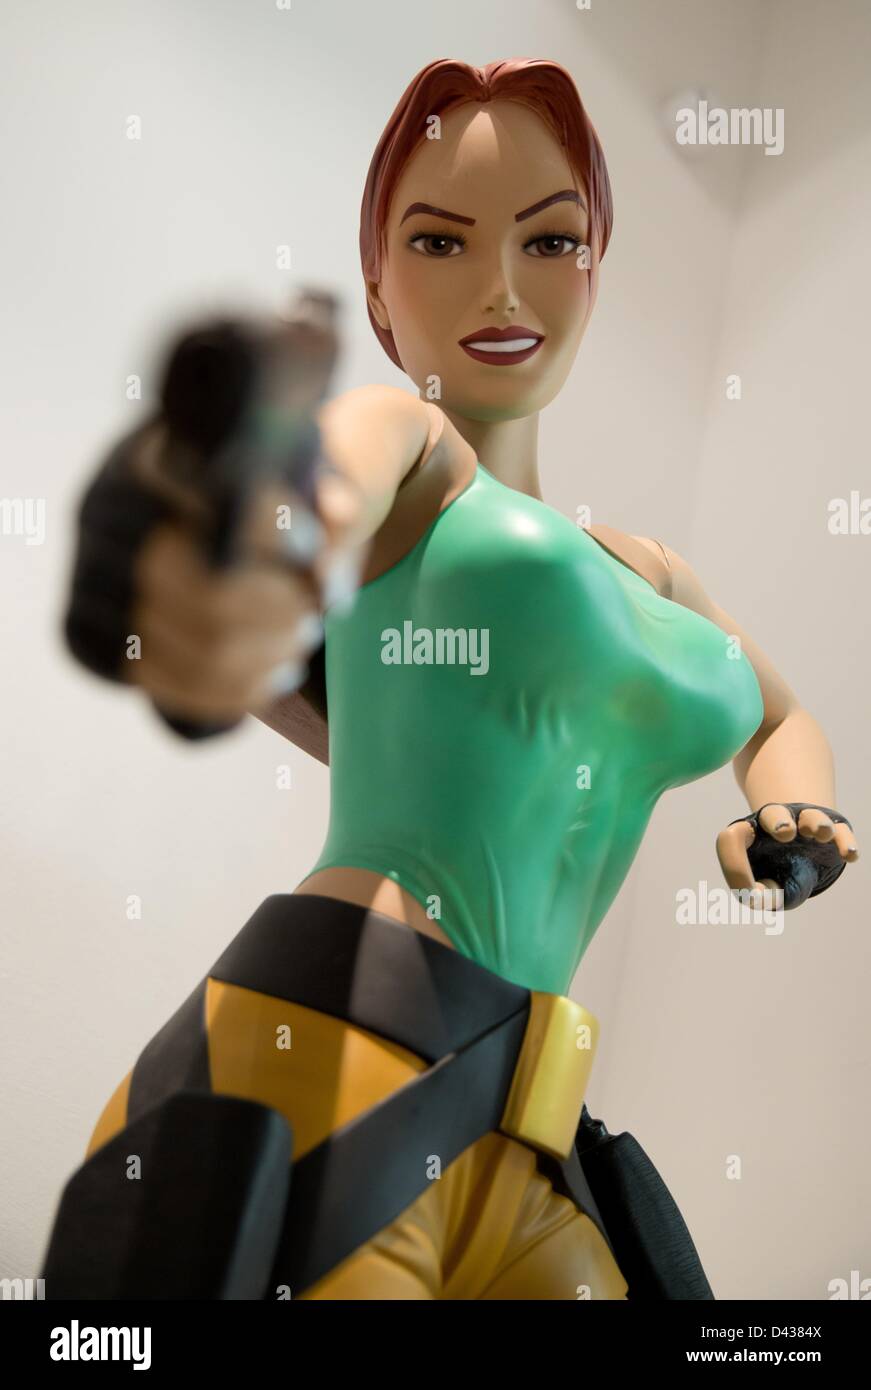 A Lara Croft figure is displayed at the Tomb Raider exhibition at the Computer Games Museum in Berlin, Germany, 26 February 2013. The museum of Andreas Lange exhibits computers of all kinds and periods. Photo: Joerg Carstensen Stock Photo